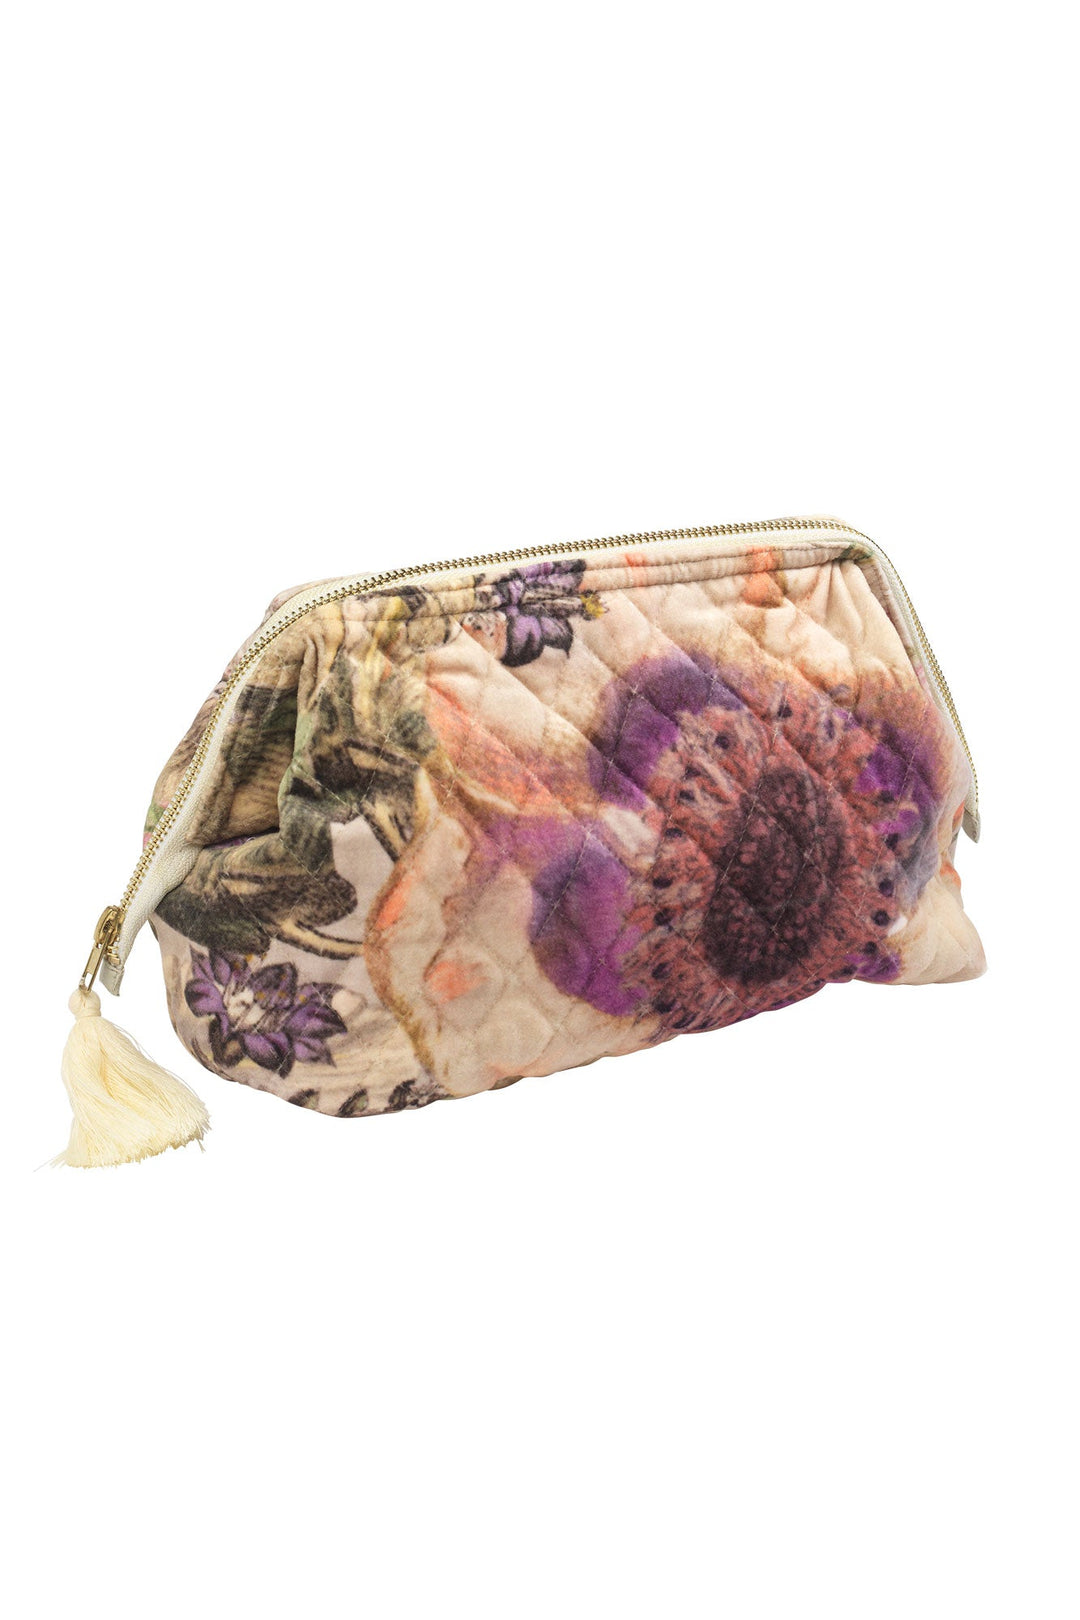 Women's accessories, gifts for her. Velvet make-up clutch bag in stone with daisy floral print by One Hundred Stars